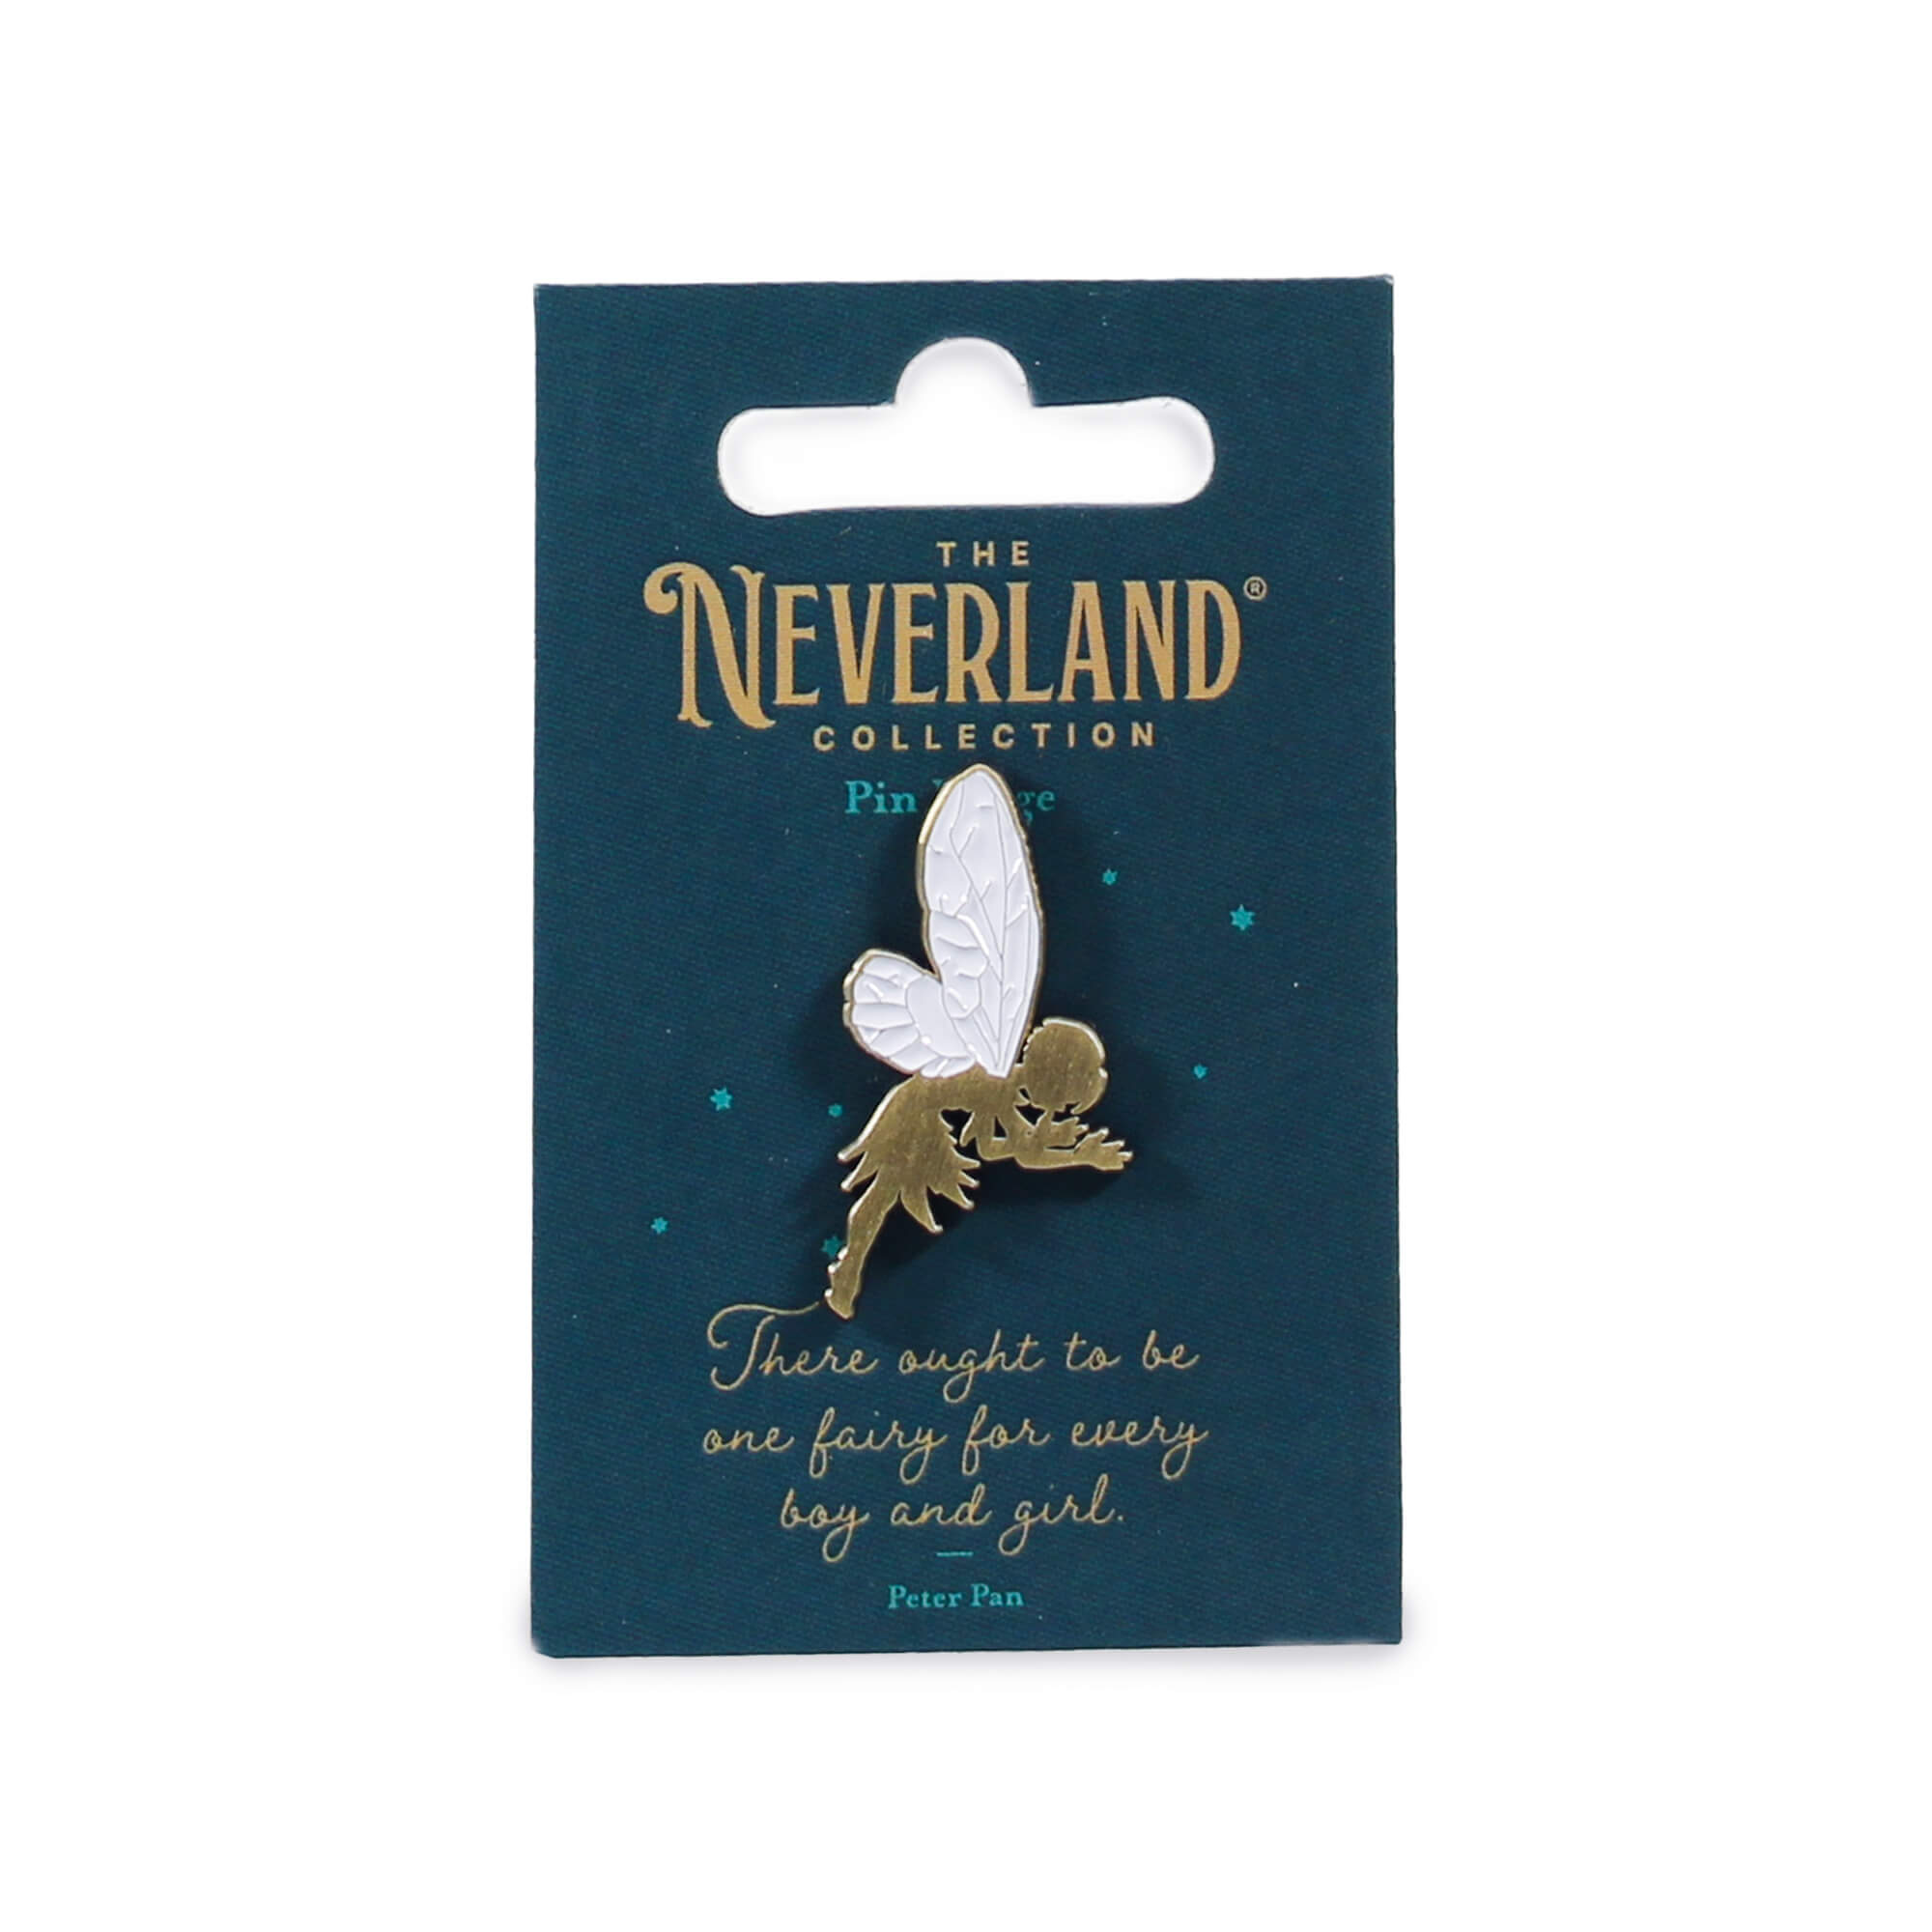 Tinkerbell inspired pin badge in package